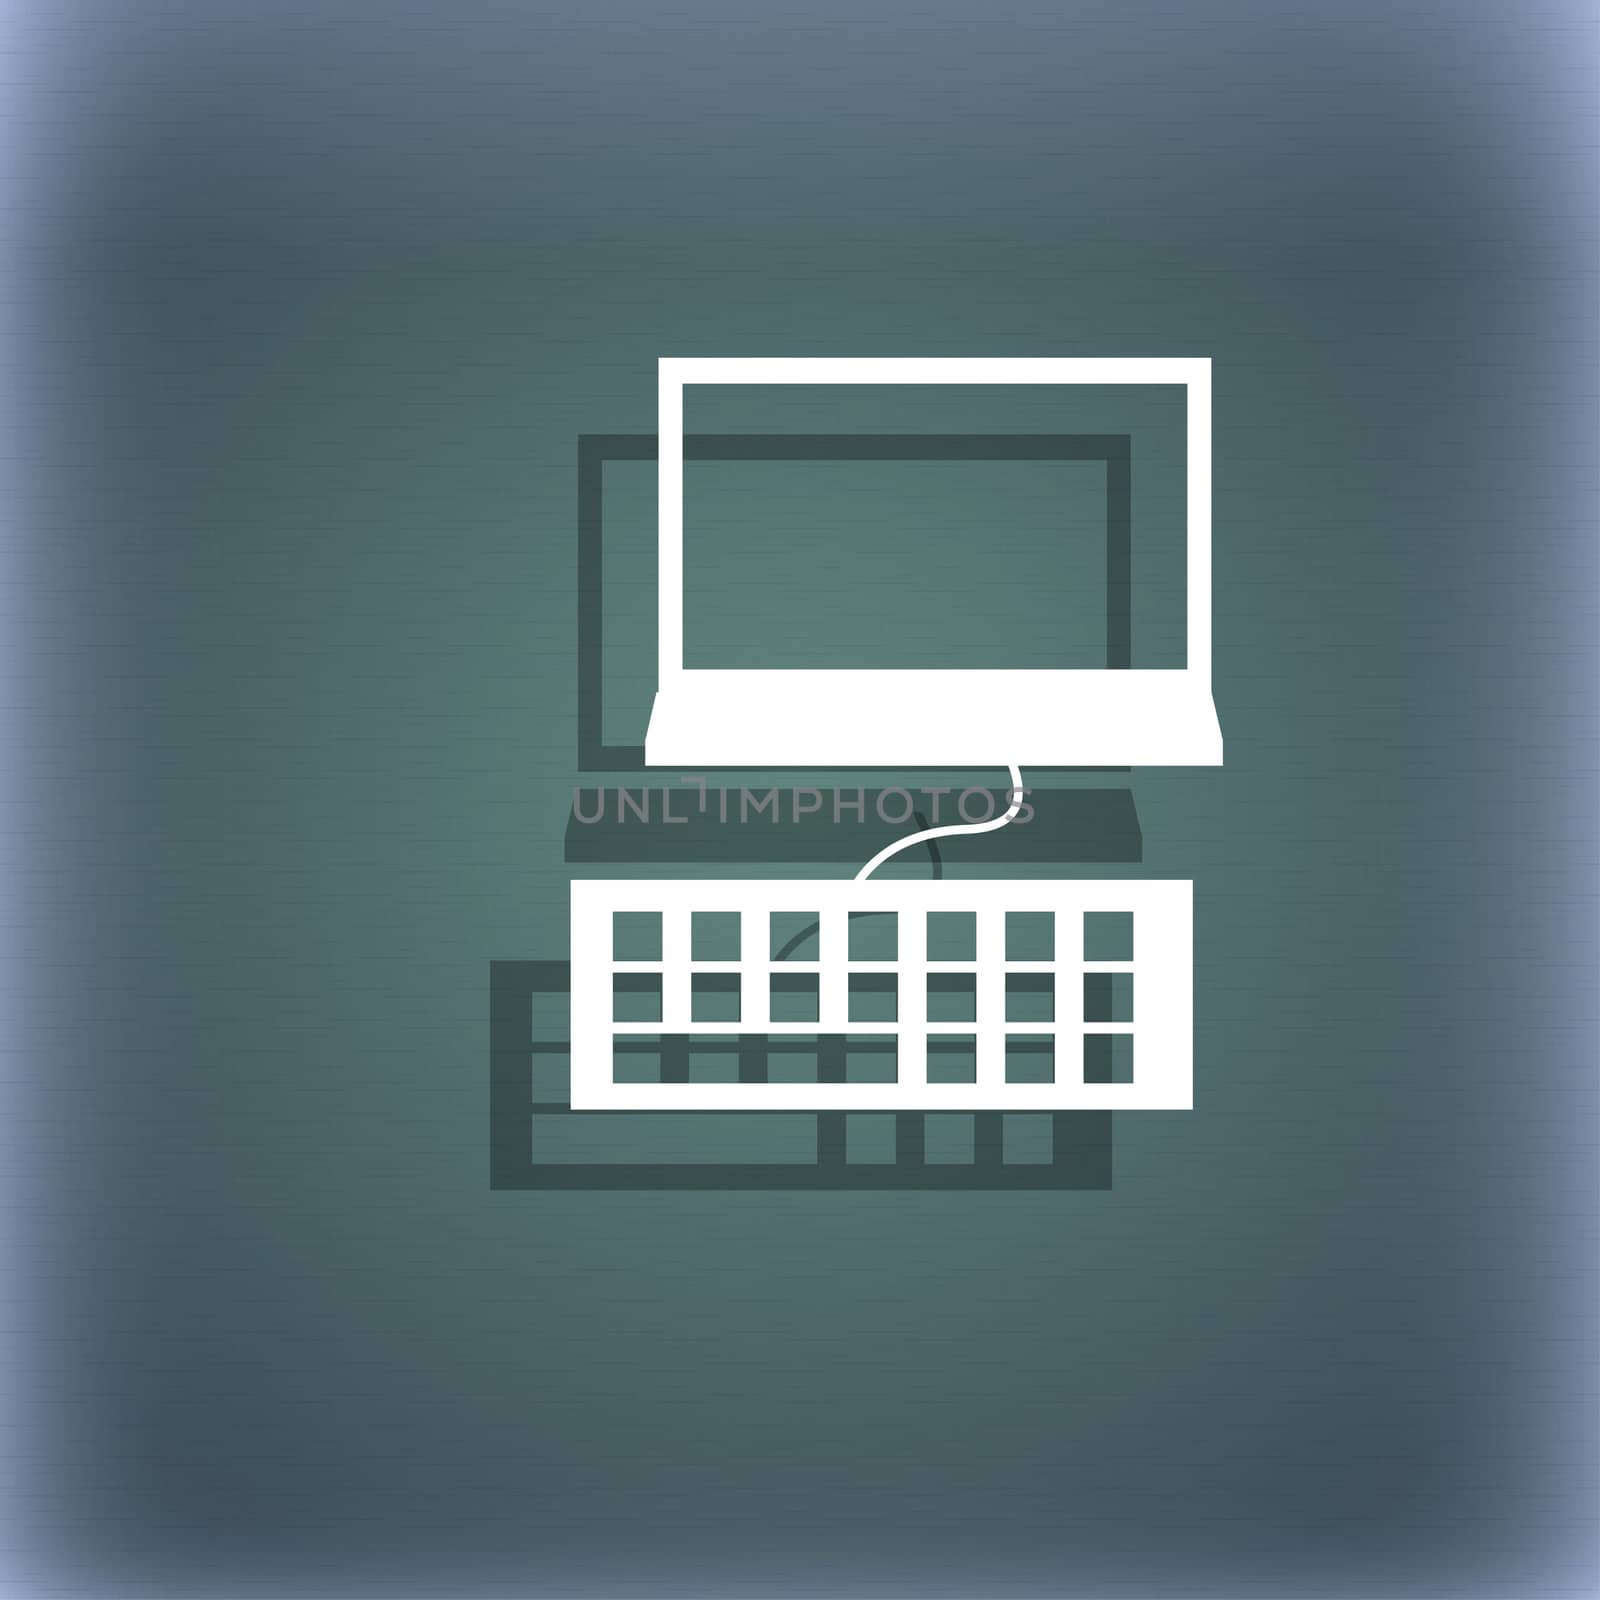 Computer monitor and keyboard Icon. On the blue-green abstract background with shadow and space for your text. illustration